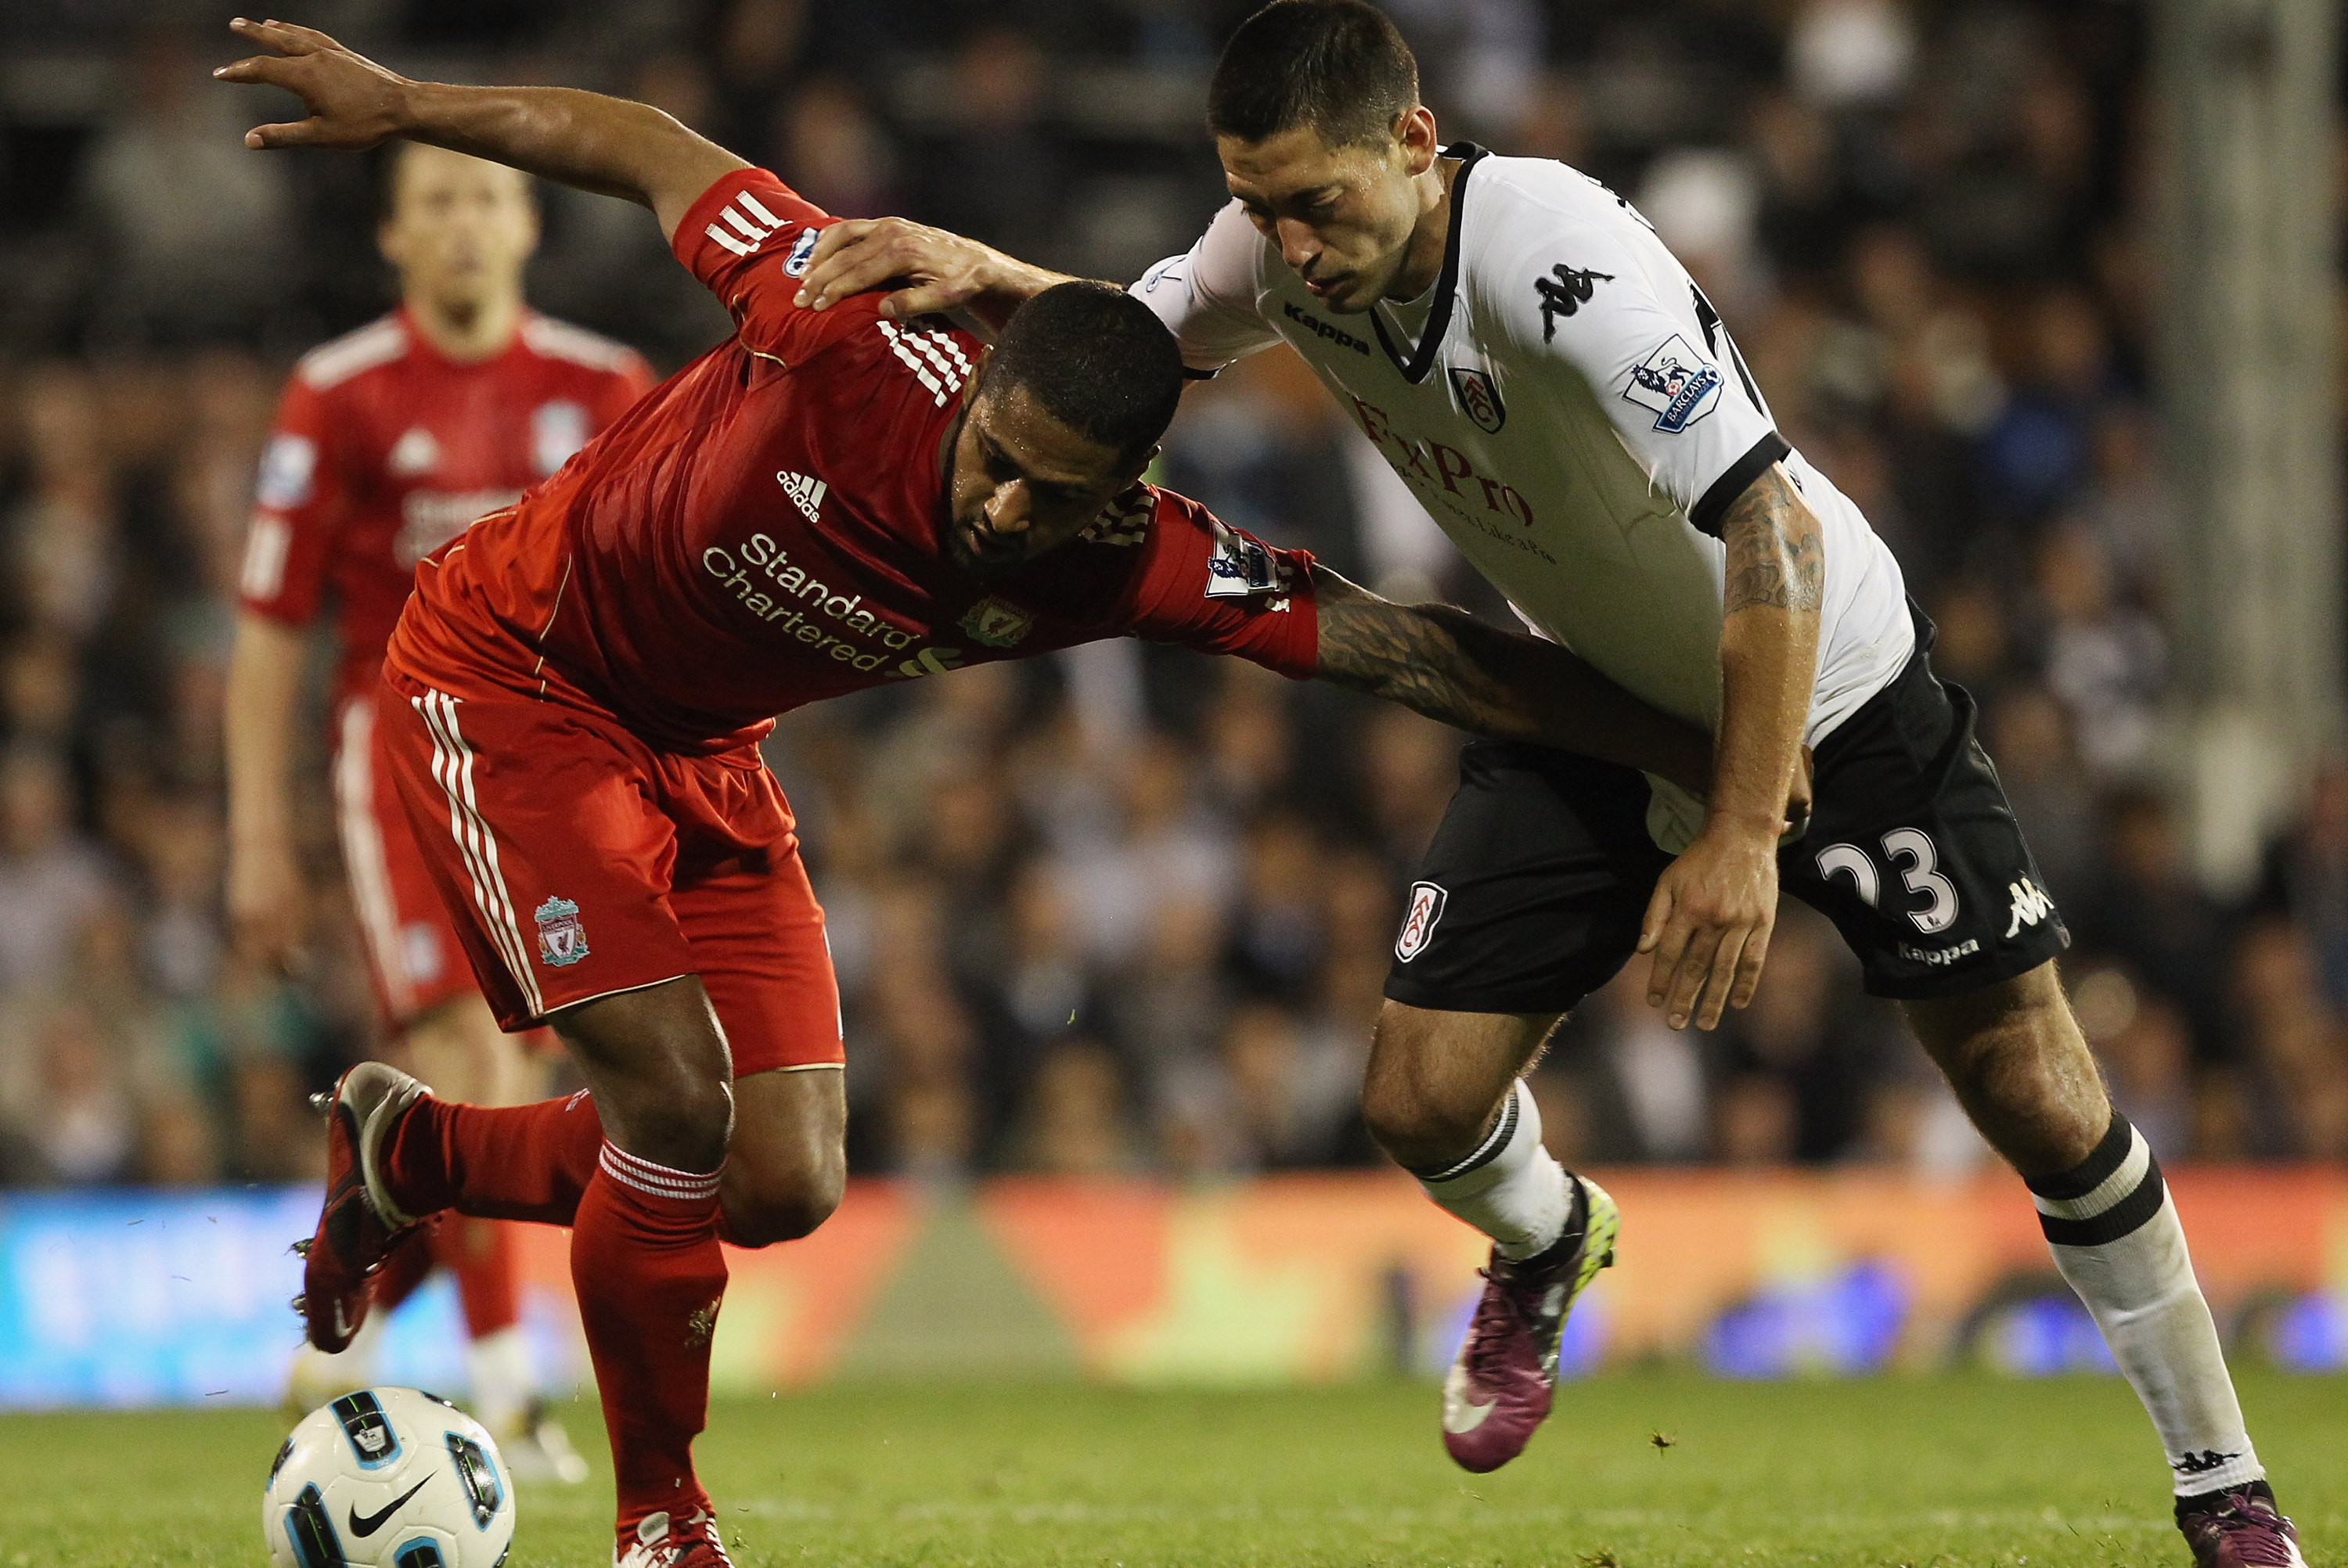 Premier League: Fulham accept Liverpool apology over Clint Dempsey attempts, Football News